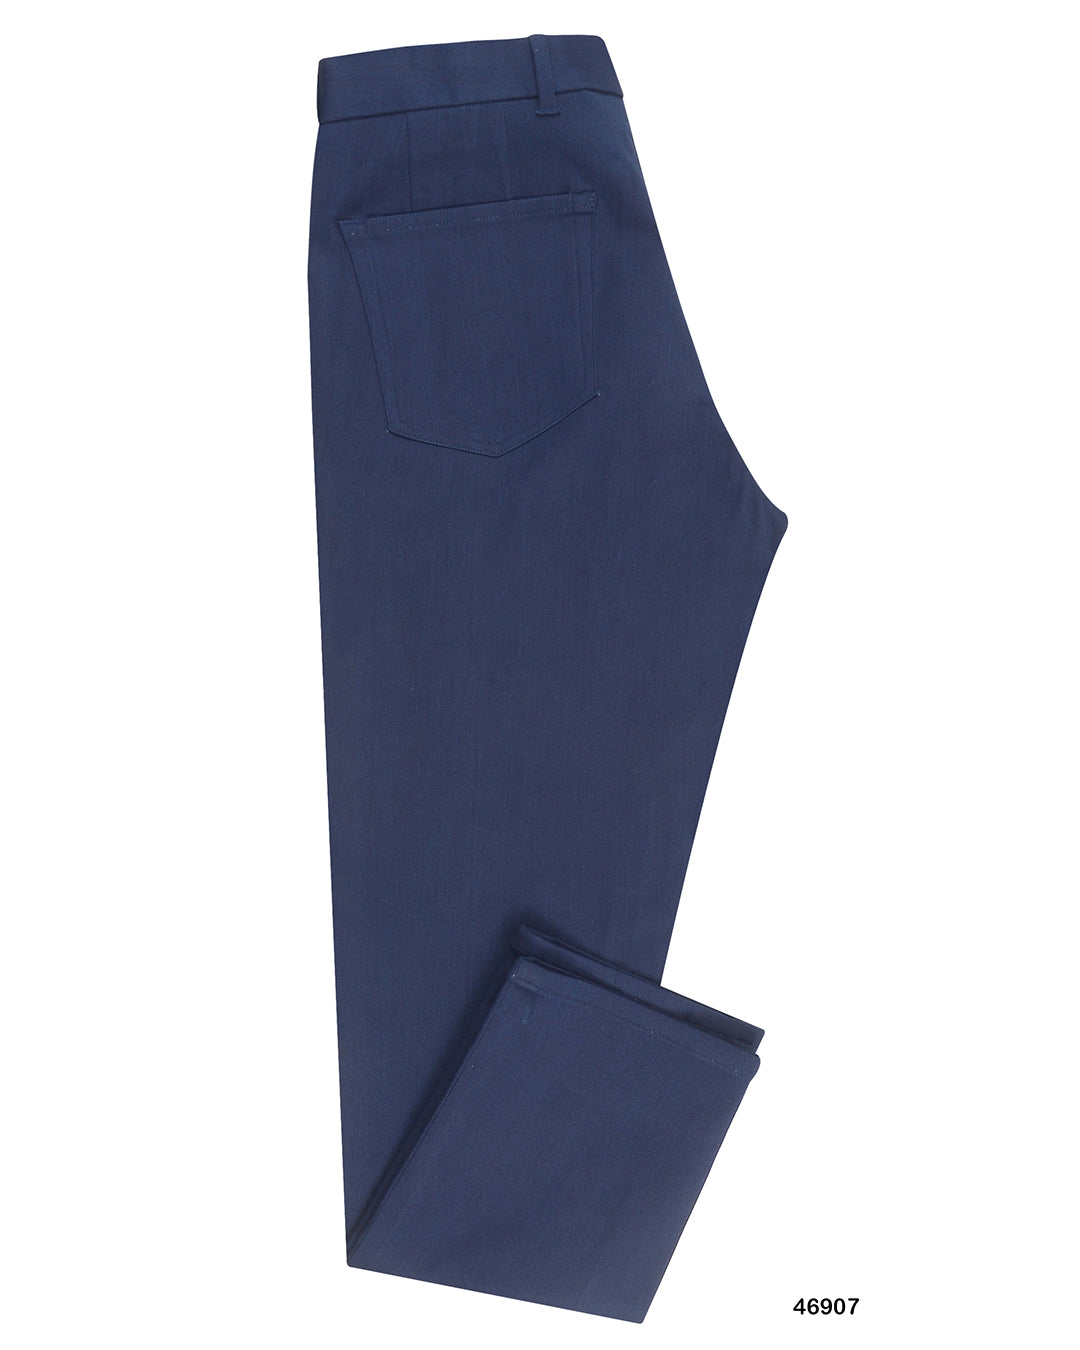 Side view of custom jeans for men by Luxire in soft indigo